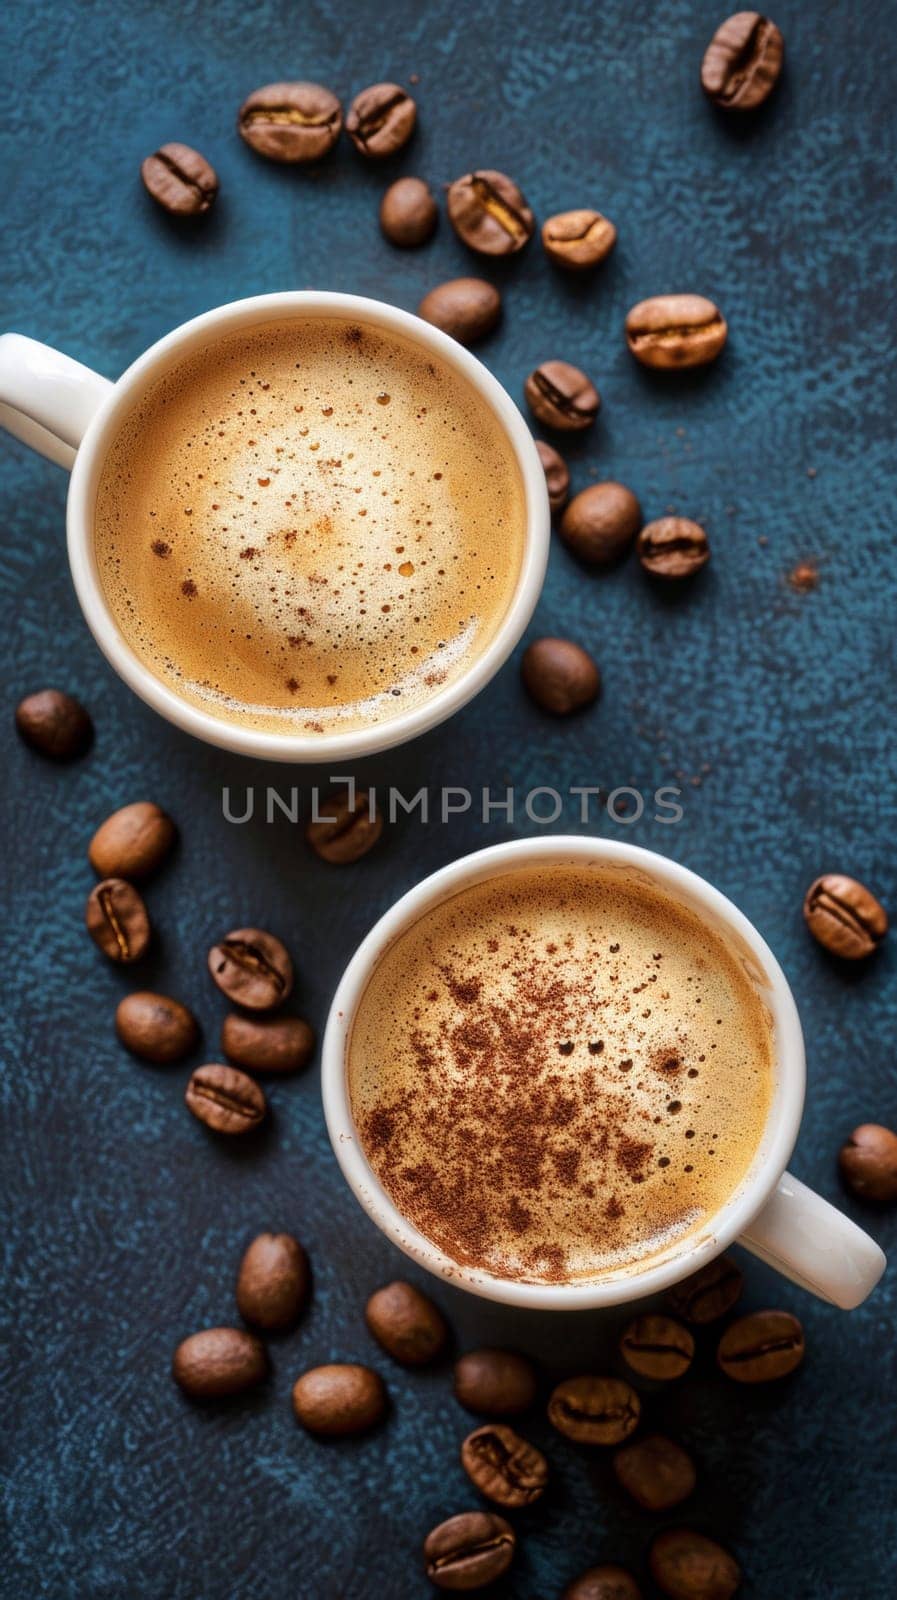 Two cups of coffee with a sprinkle on top sit next to beans